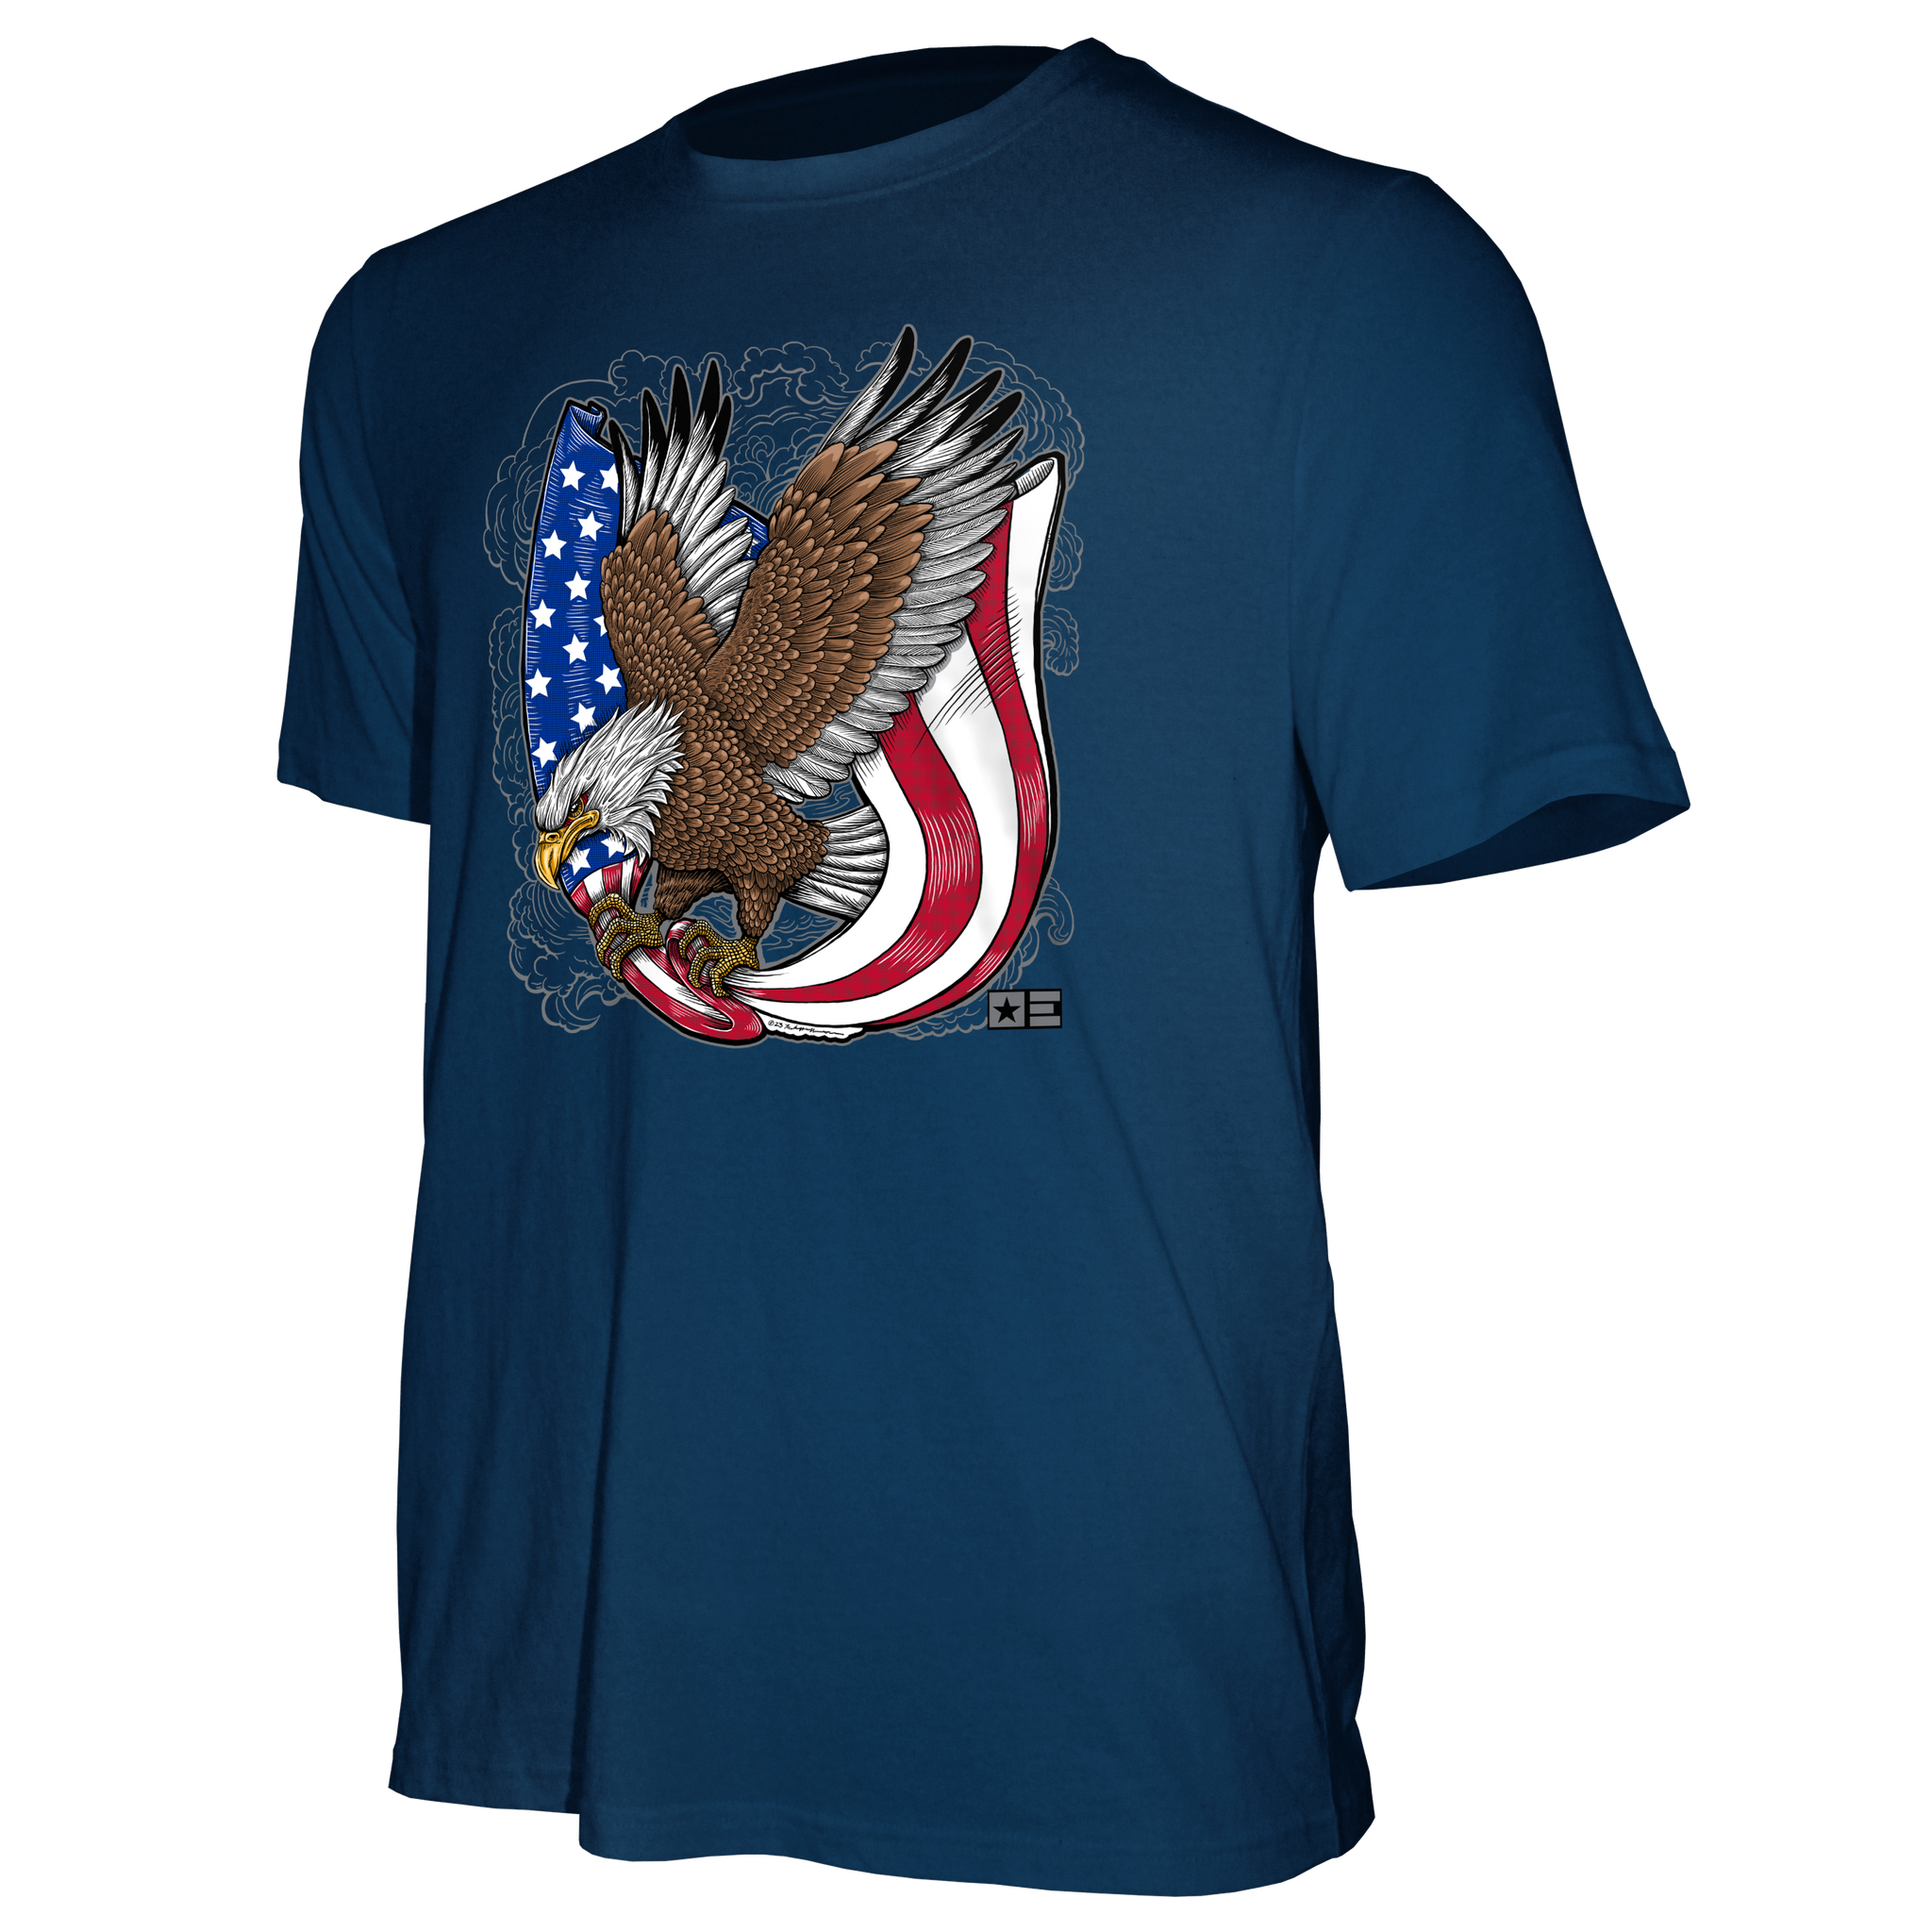 Outdoor Endeavors Patriotic - American Made Tee - Retro Tattoo Eagle - Front Print